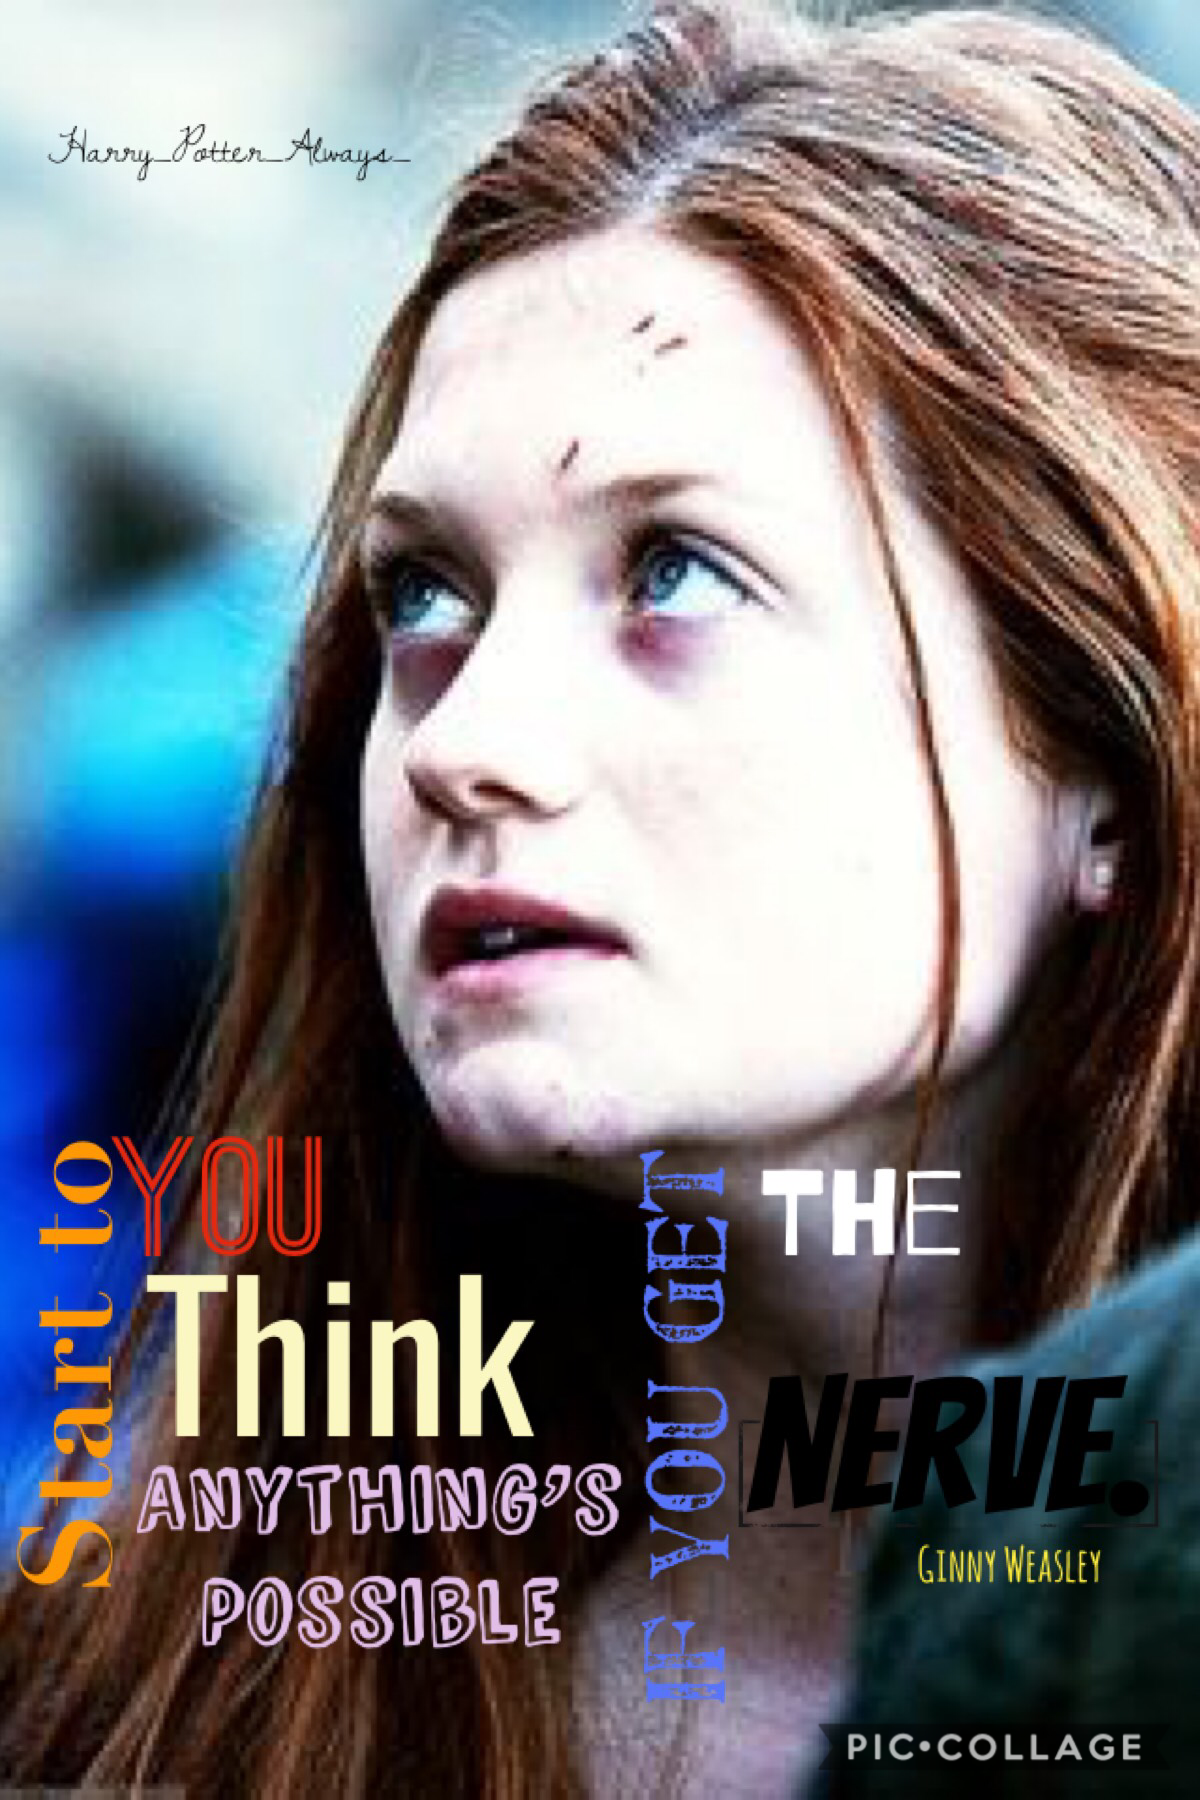 Ginny Weasley... Tap... 
What type of png’s should I use? I wanna make these collages look better I’m just not sure about png’s. 